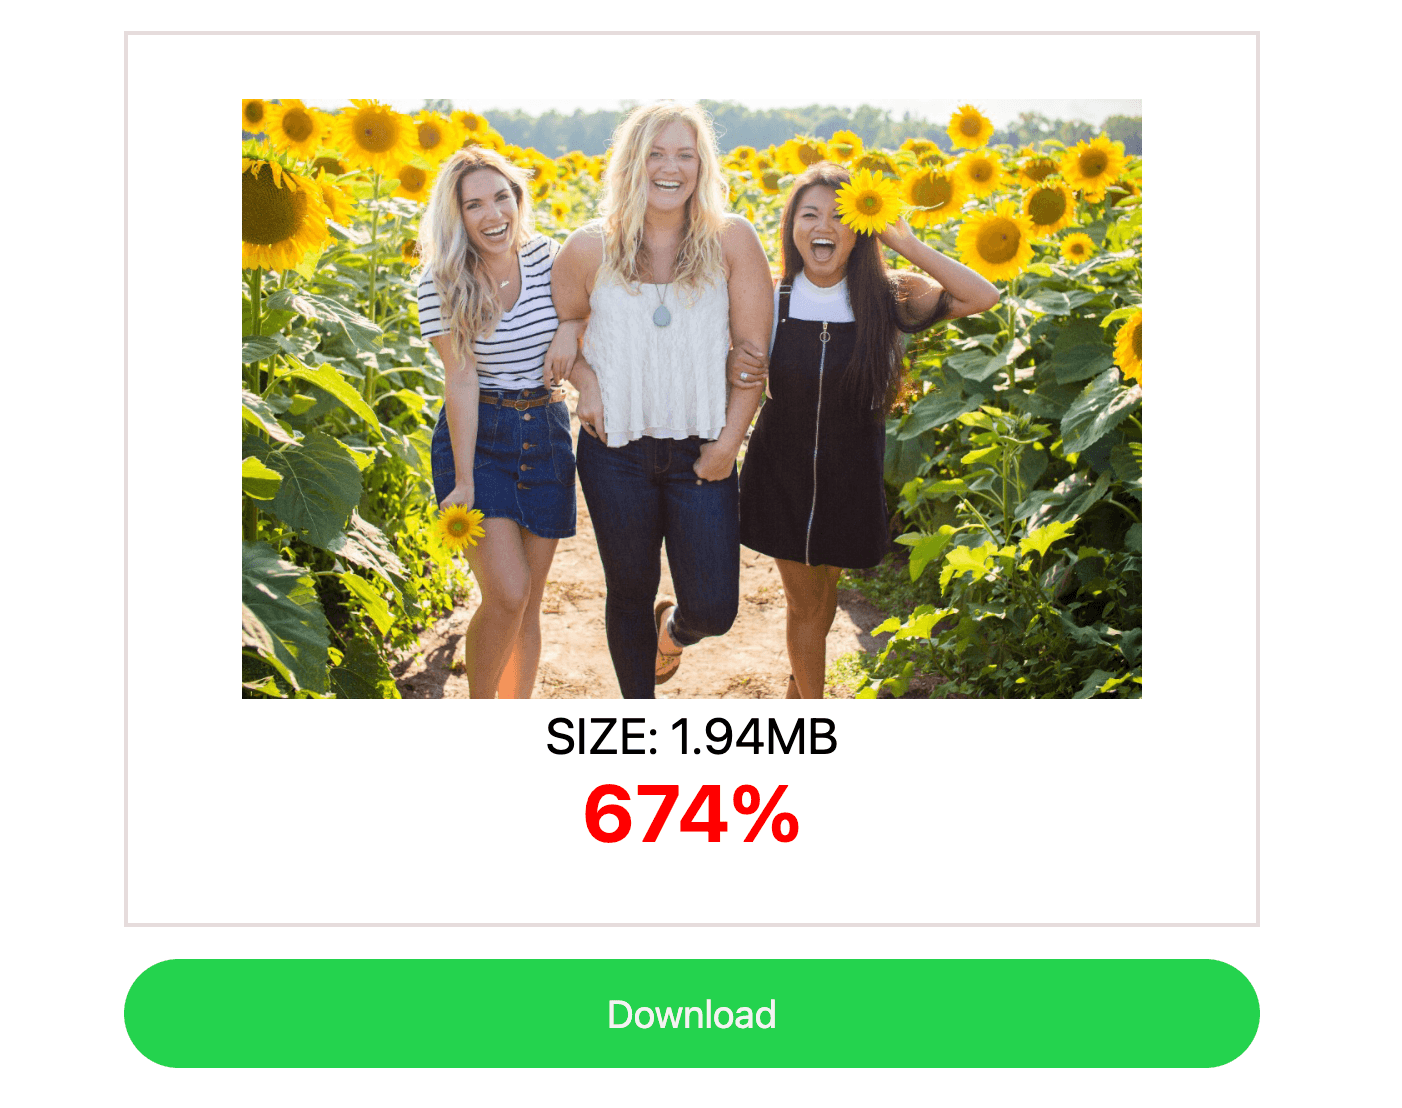 Output image component - image, size: 1.94MB, 674%, download button